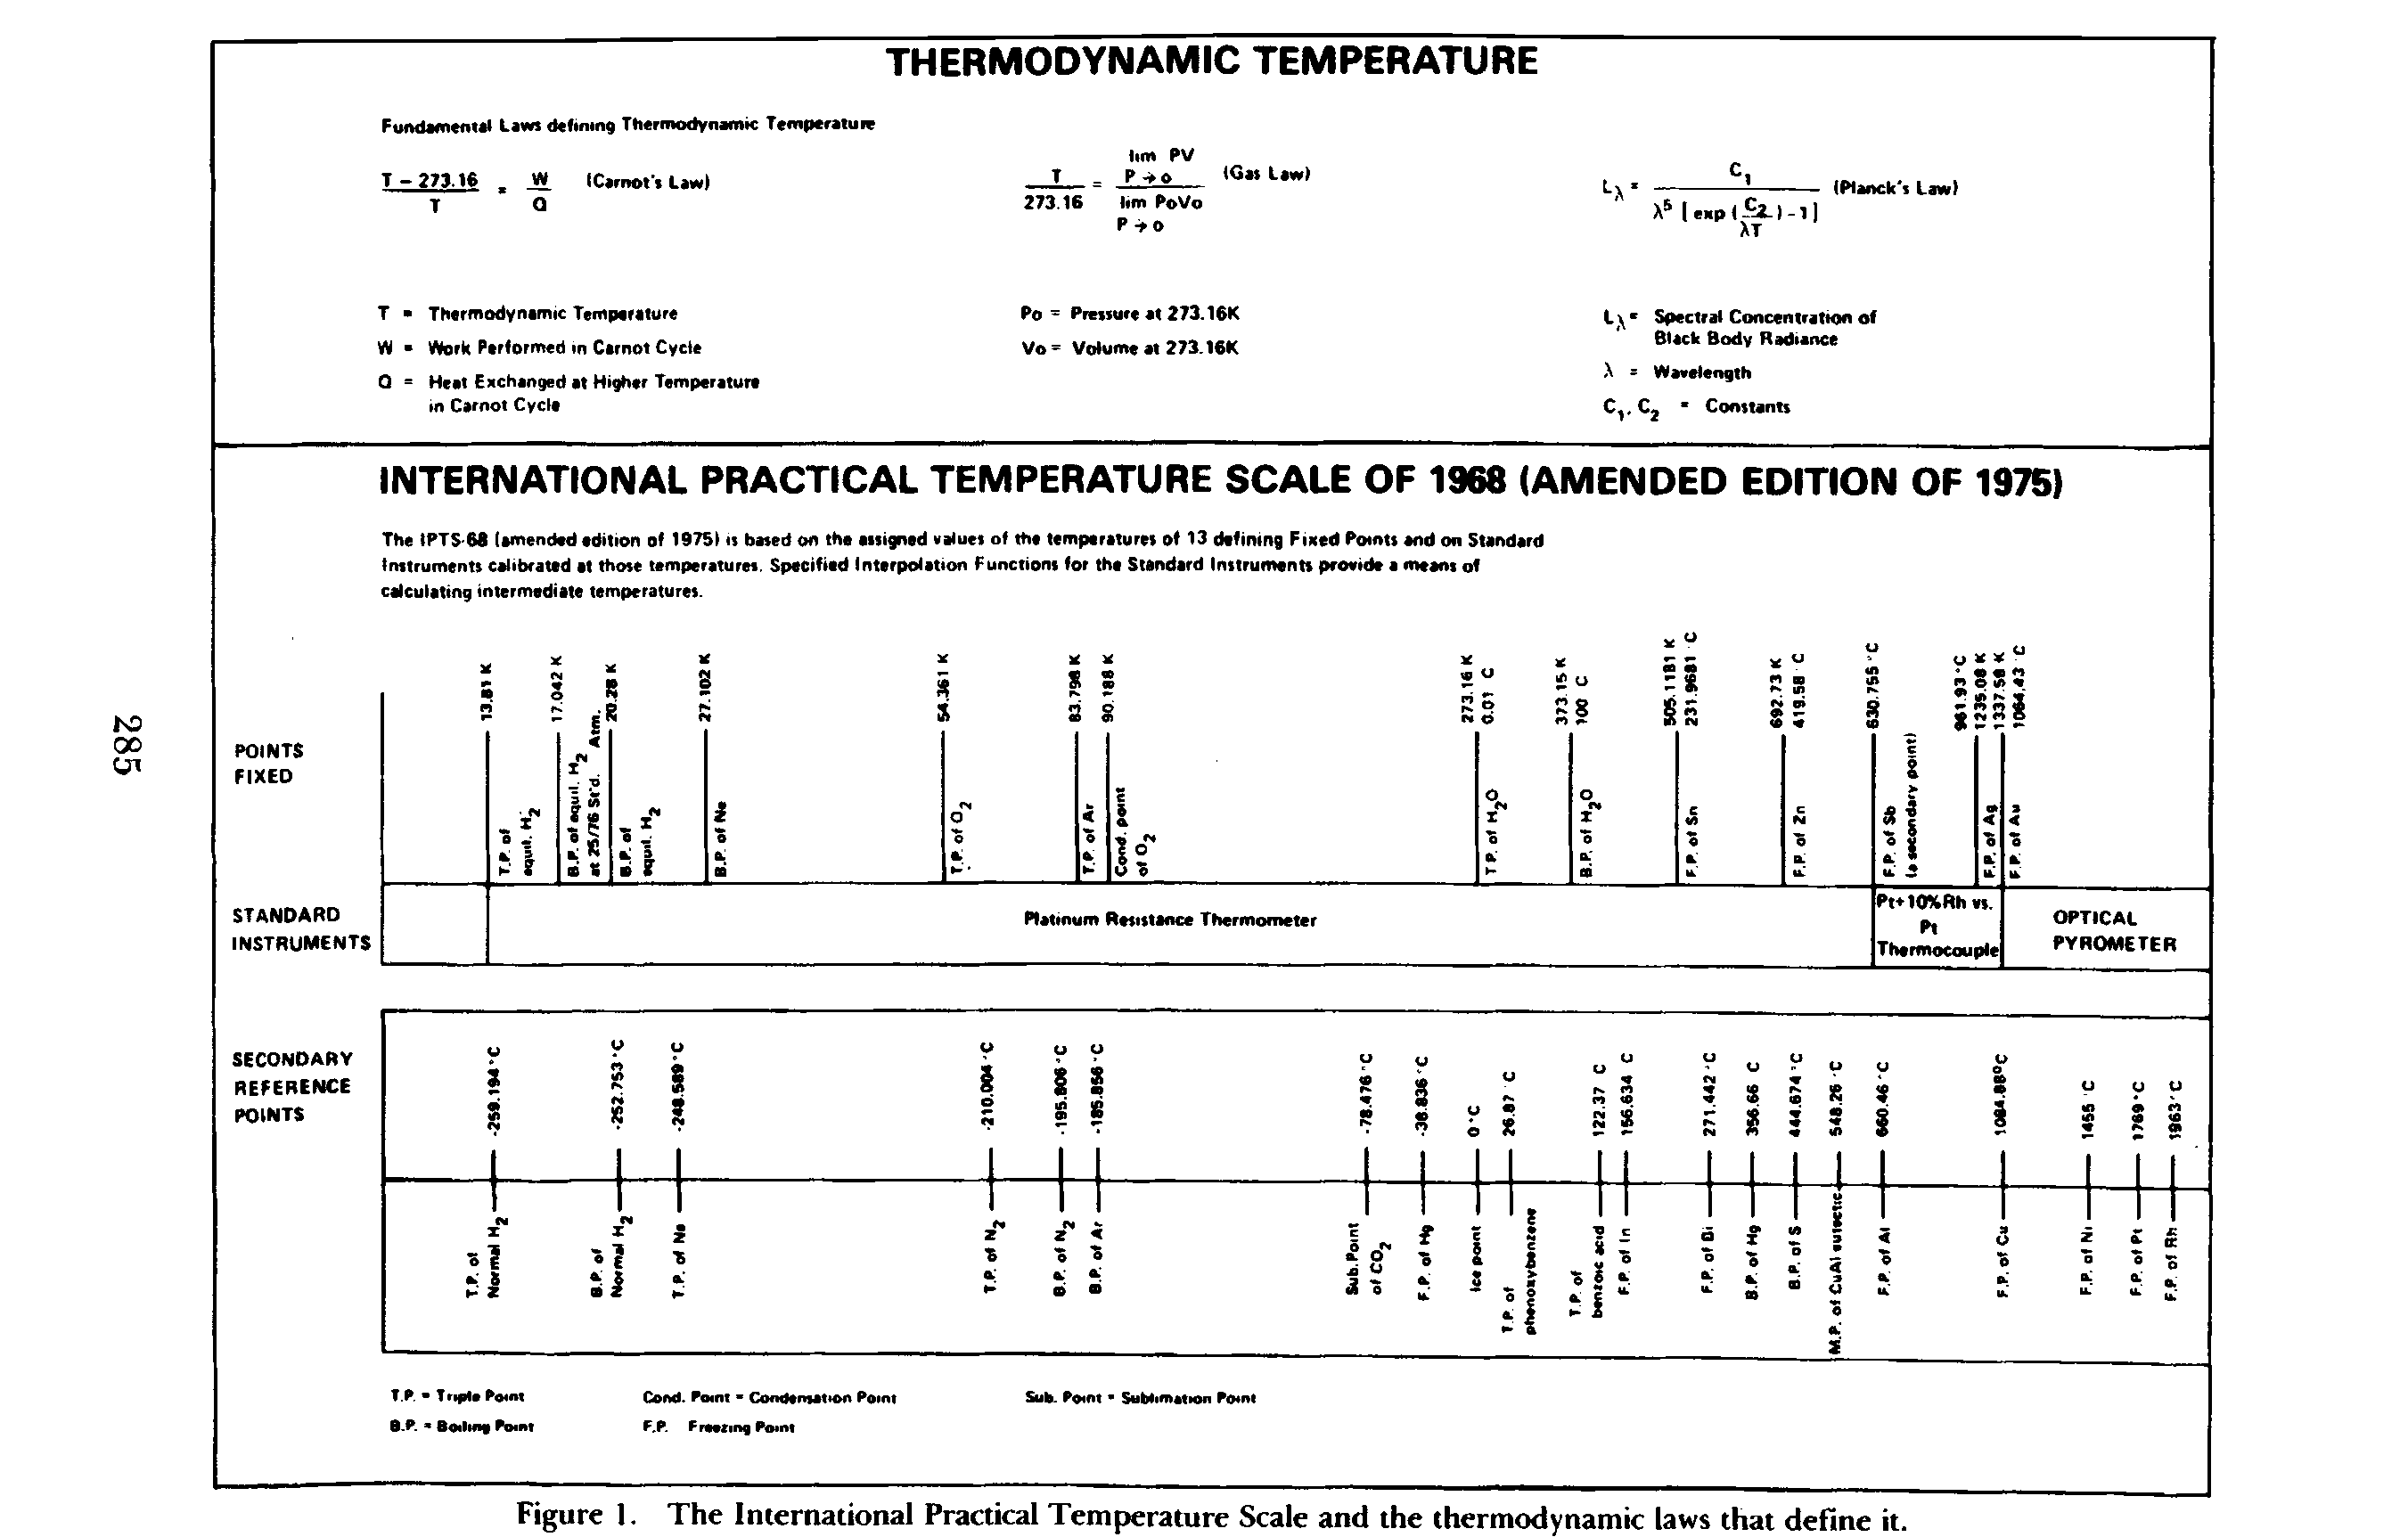 Figure 1. The International Practical Temperature Scale and the thermodynamic laws that define it.